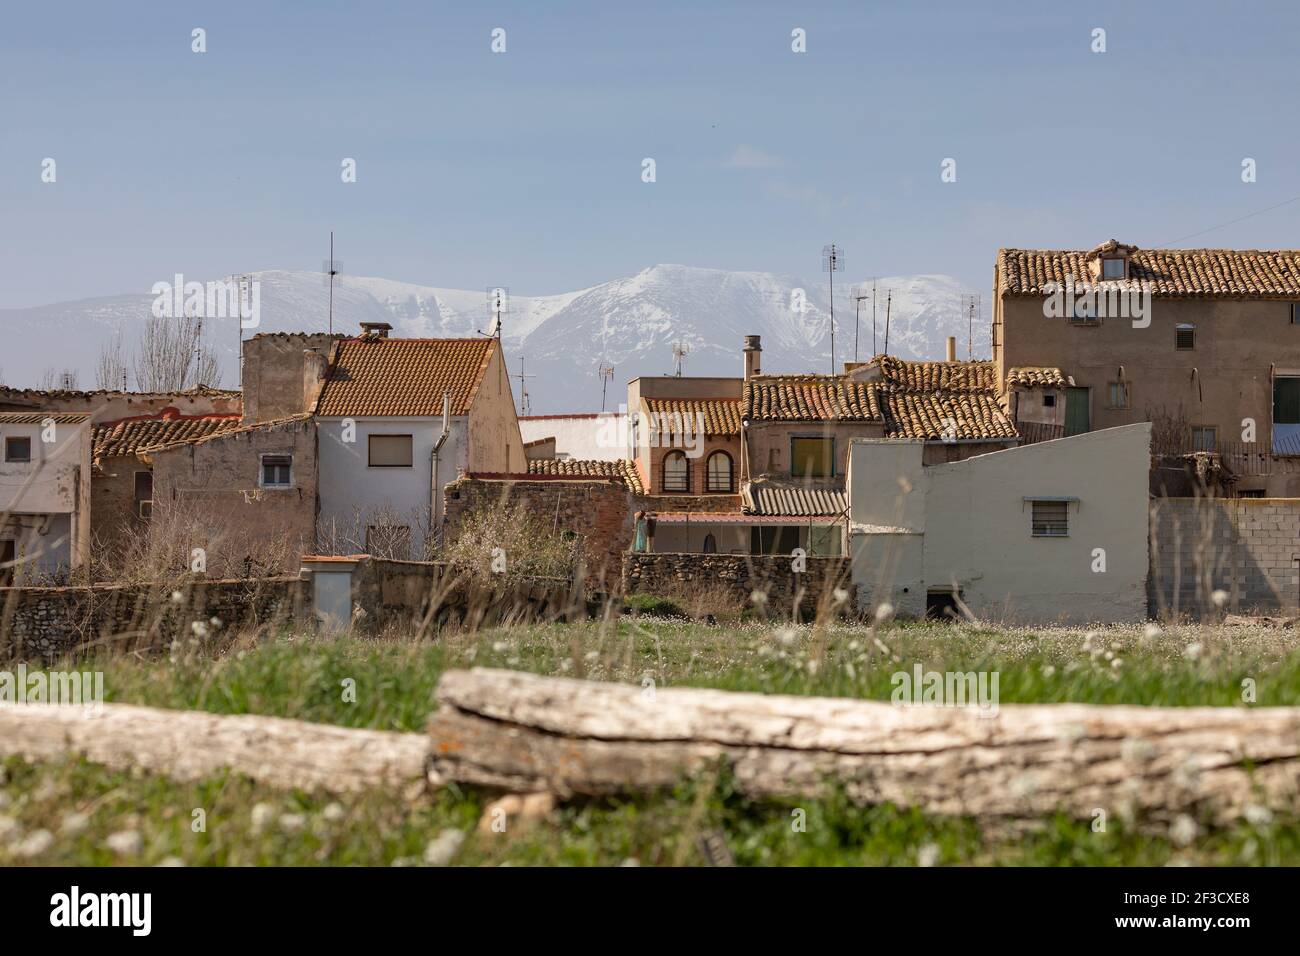 Charming photograph of the houses and rooftops in the small town of Bulbuente, in the Campo de Borja region, Zaragoza, Spain, with the Moncayo in the Stock Photo